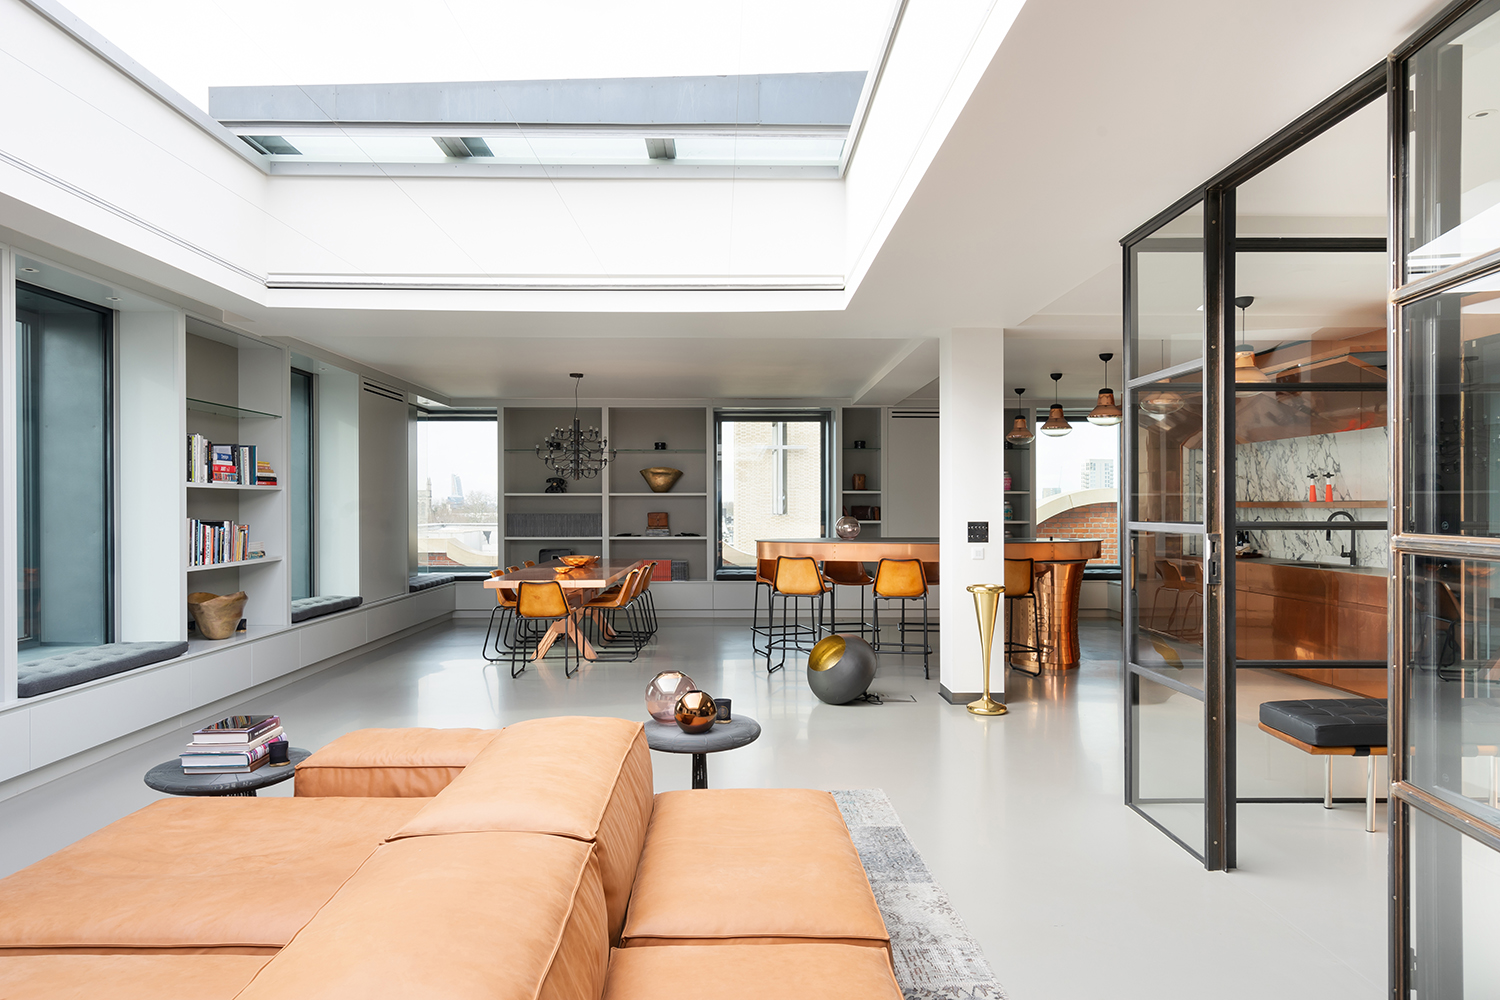 A reception room with a large skylight, internal glass doors and stylish furnishings